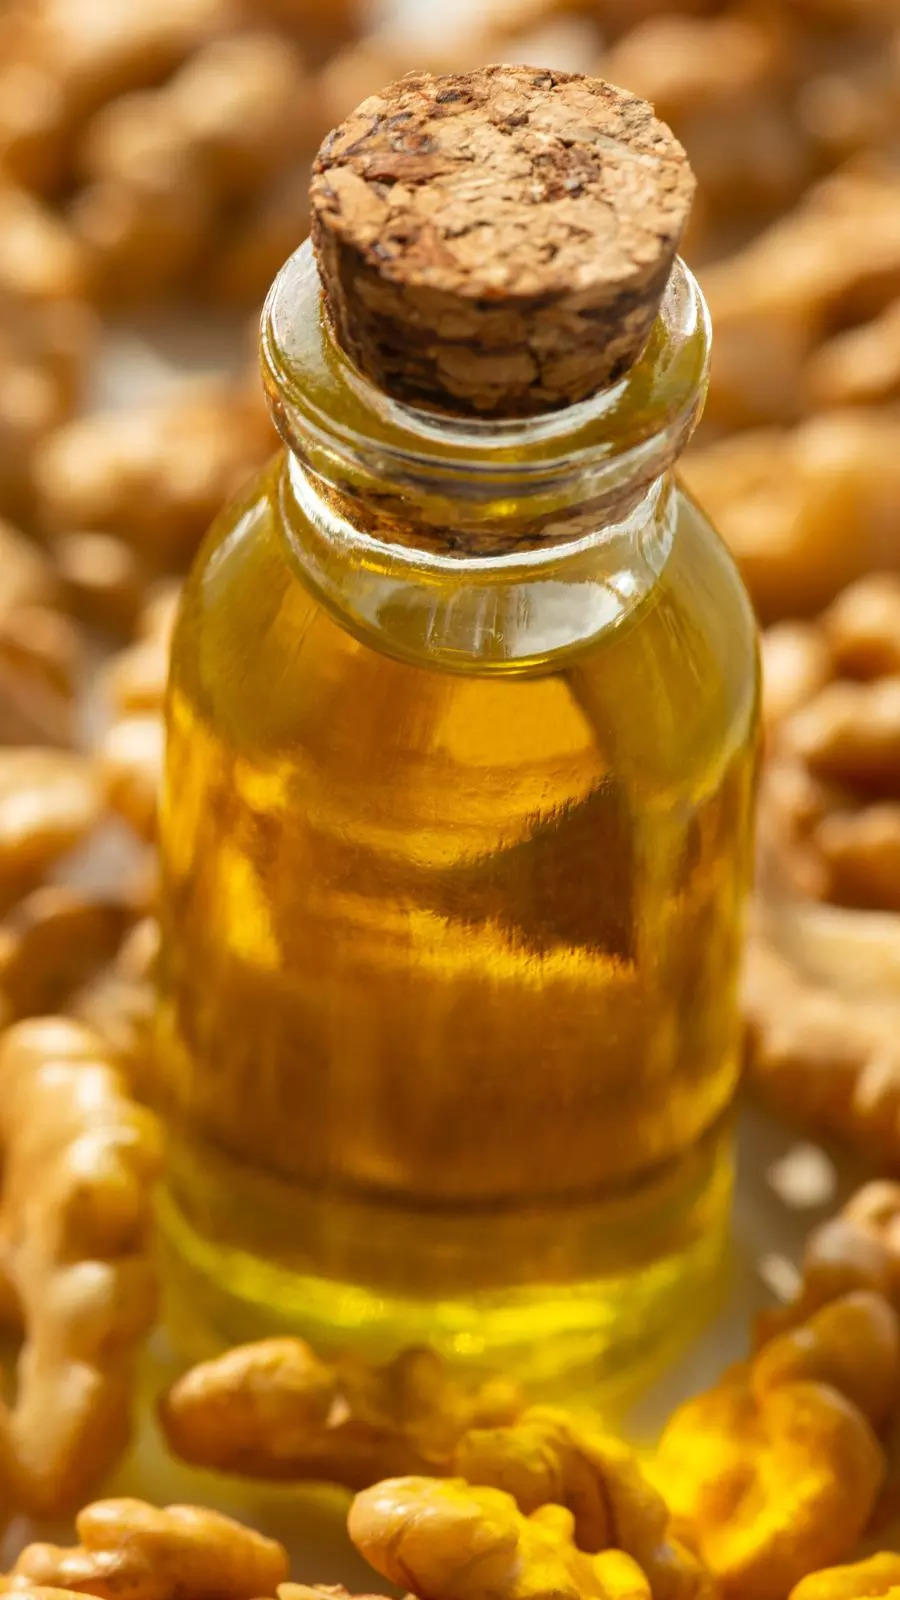 walnut oil benefits: 8 reasons to add walnut oil in your shopping cart